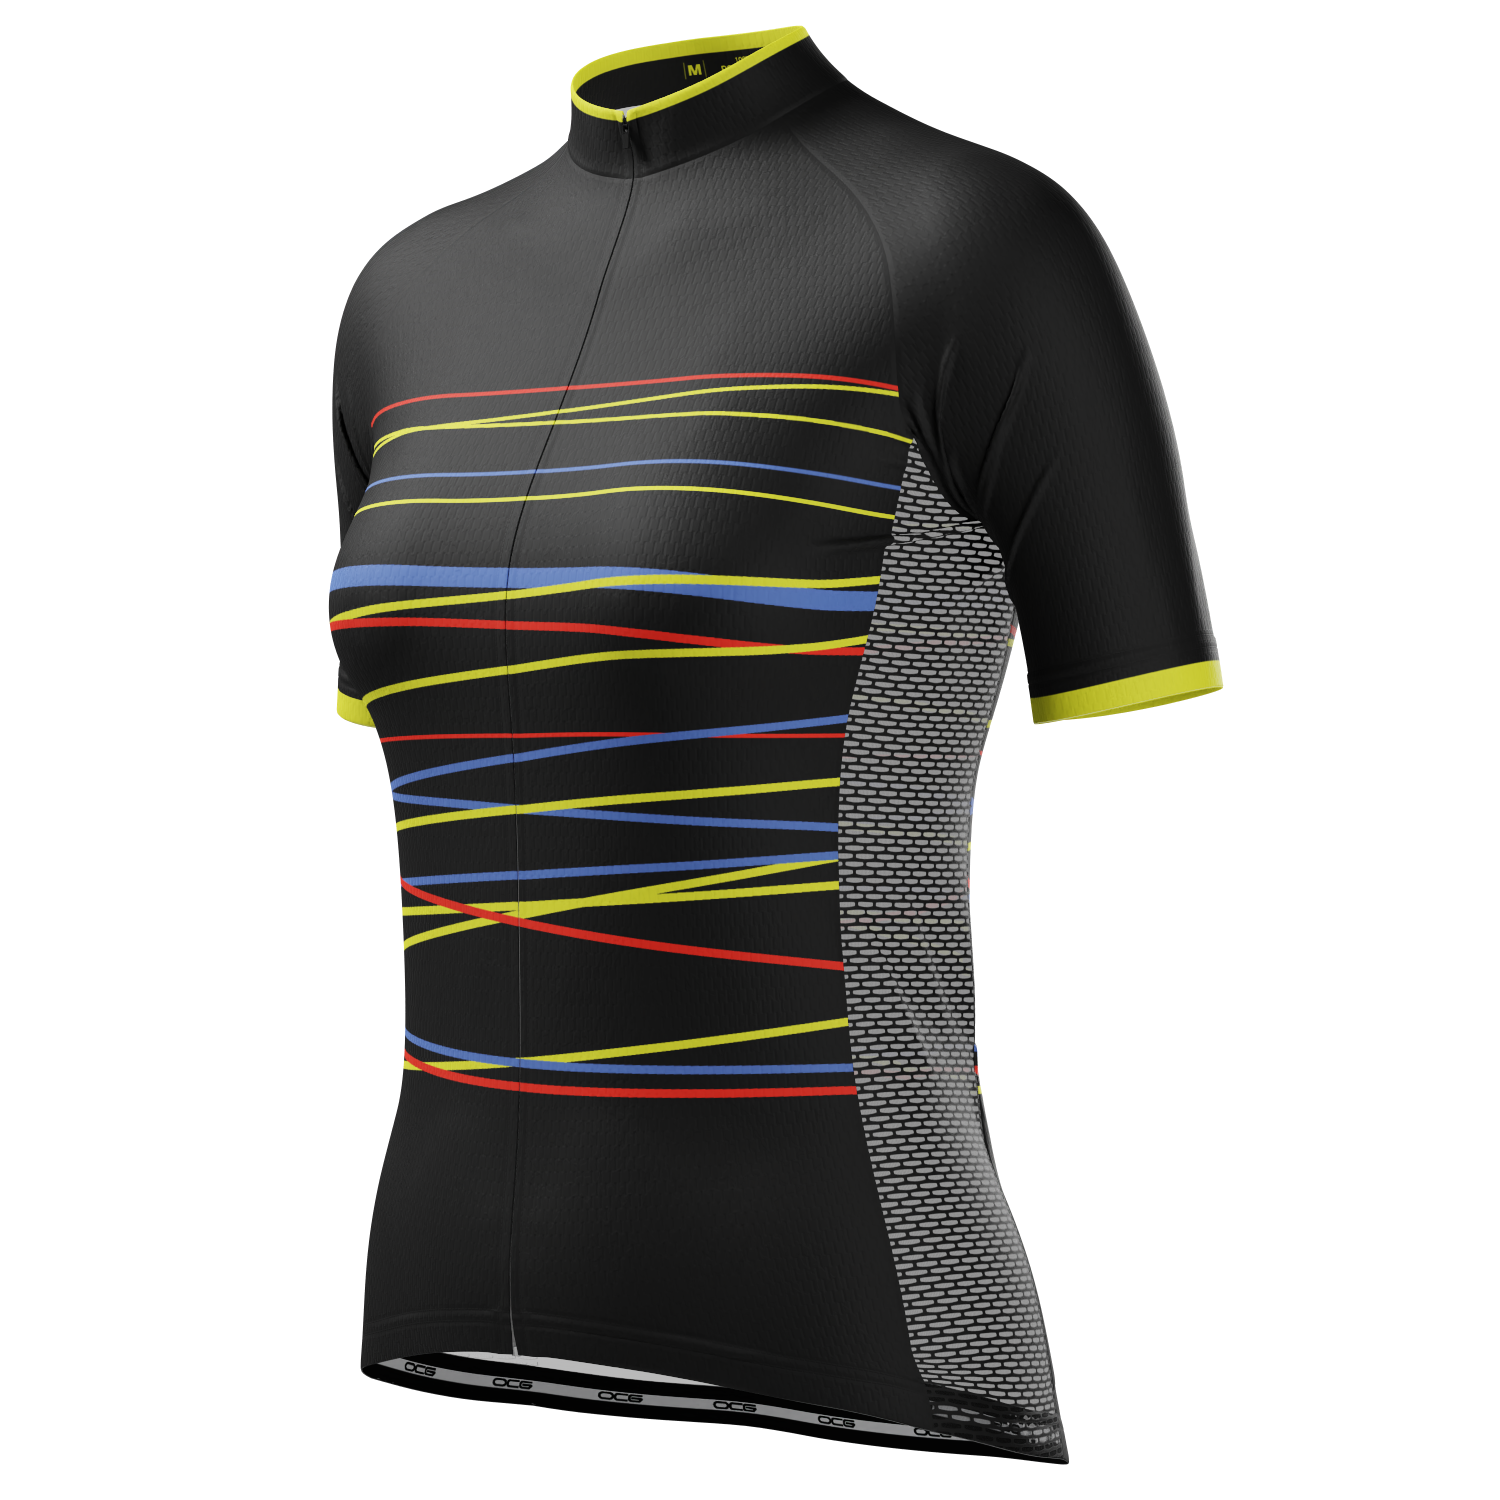 Women's Zigzag Color Lines Short Sleeve Cycling Jersey